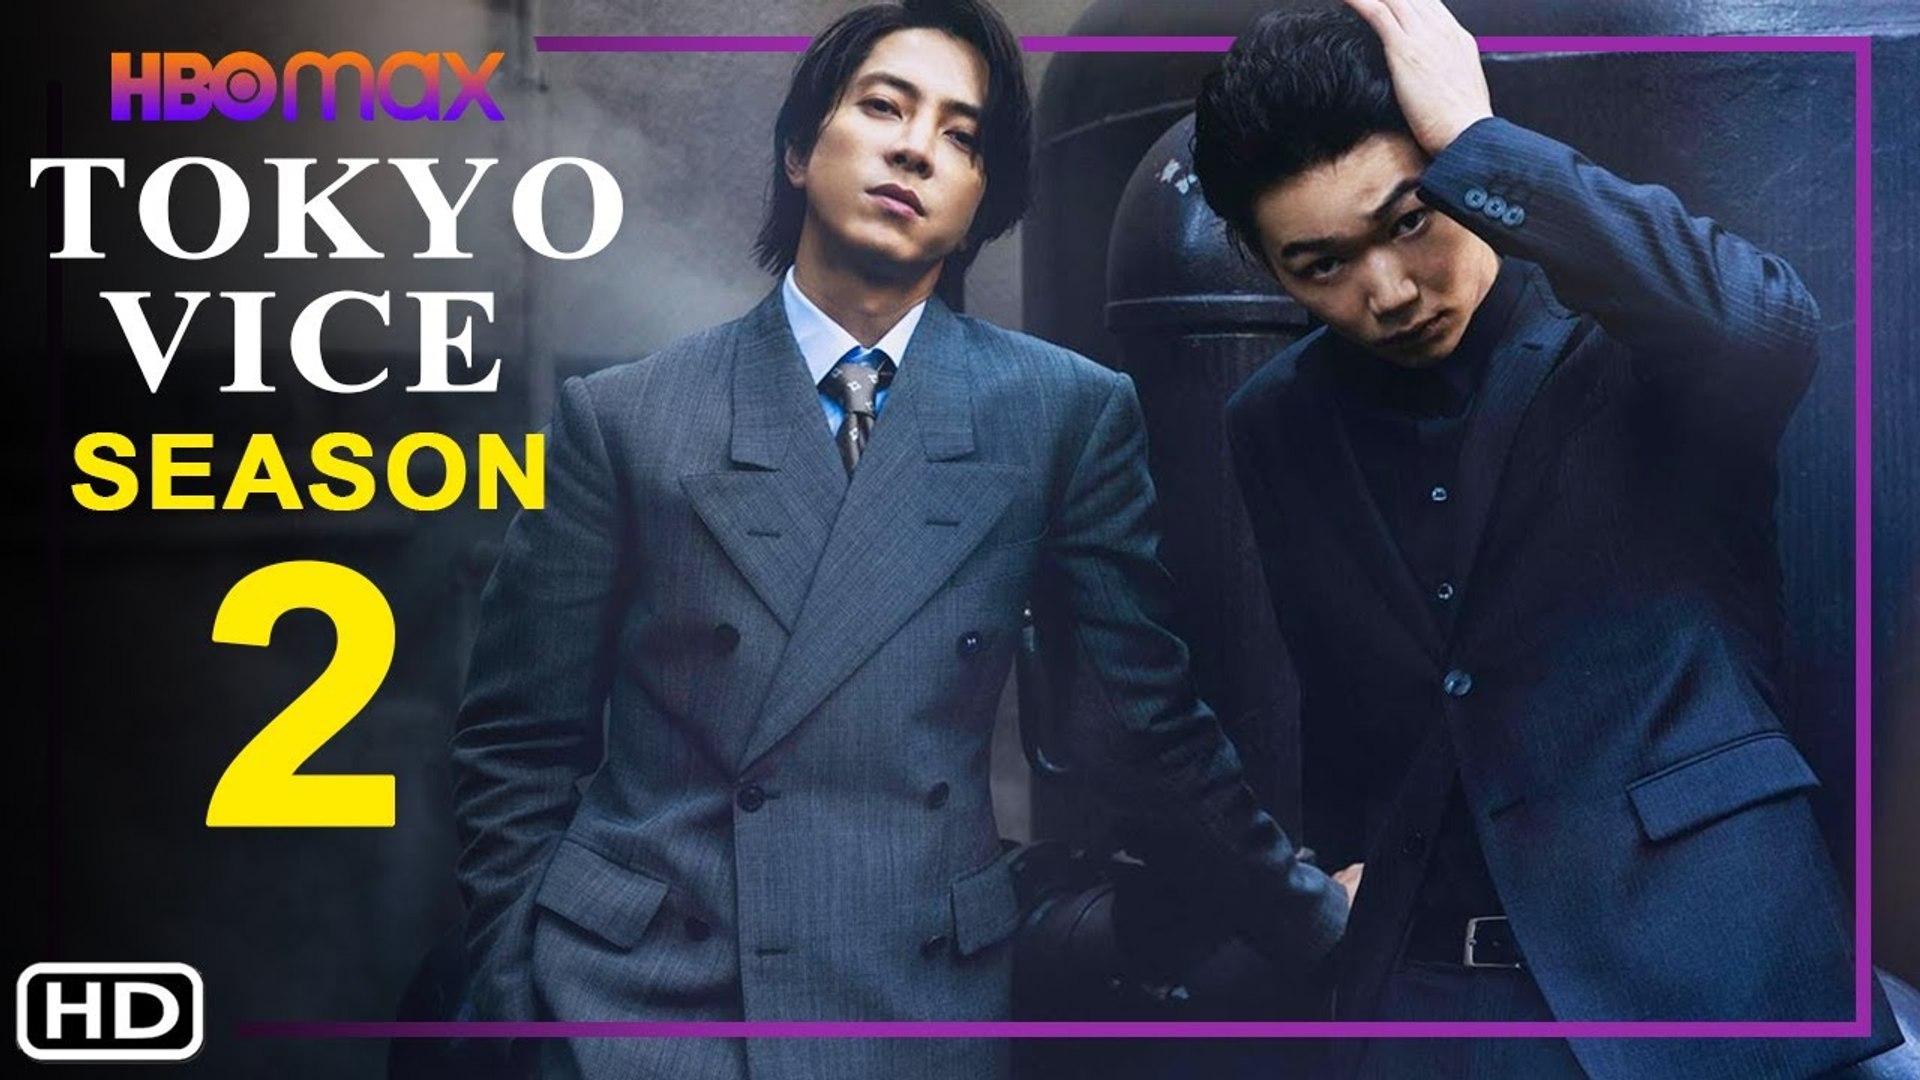 First preview of “Tokyo Vice”, the HBO Max series directed by